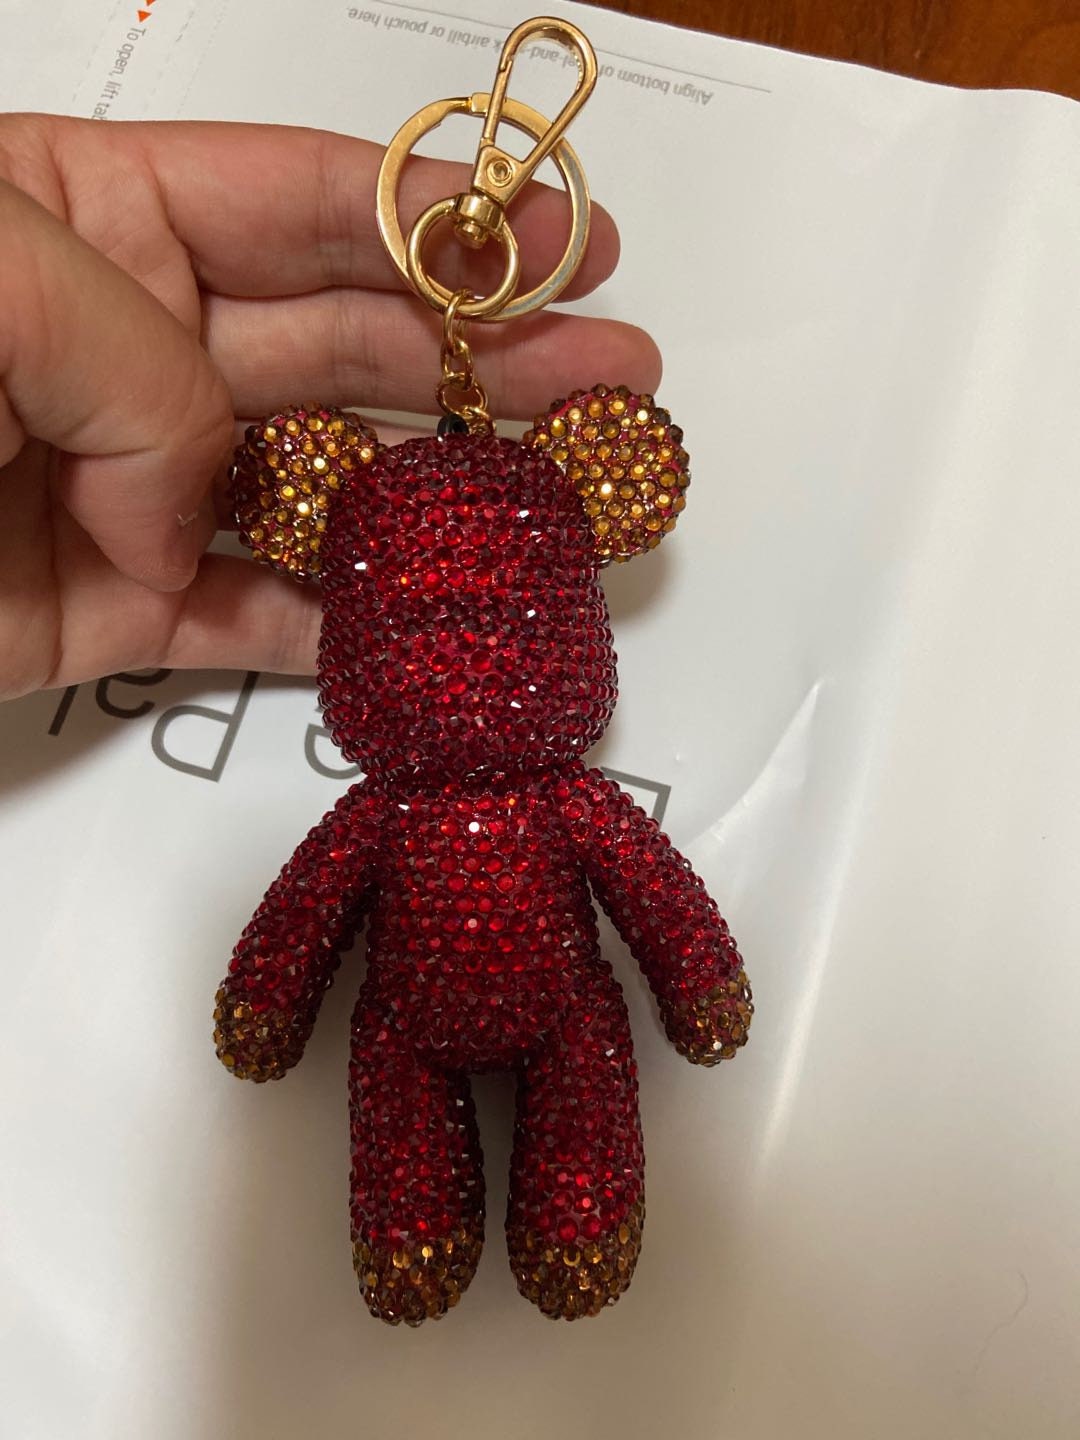 Louis Vuitton 2020 LV Teddy Bear Bag Charm and Key Holder - Brown  Keychains, Accessories - LOU662628